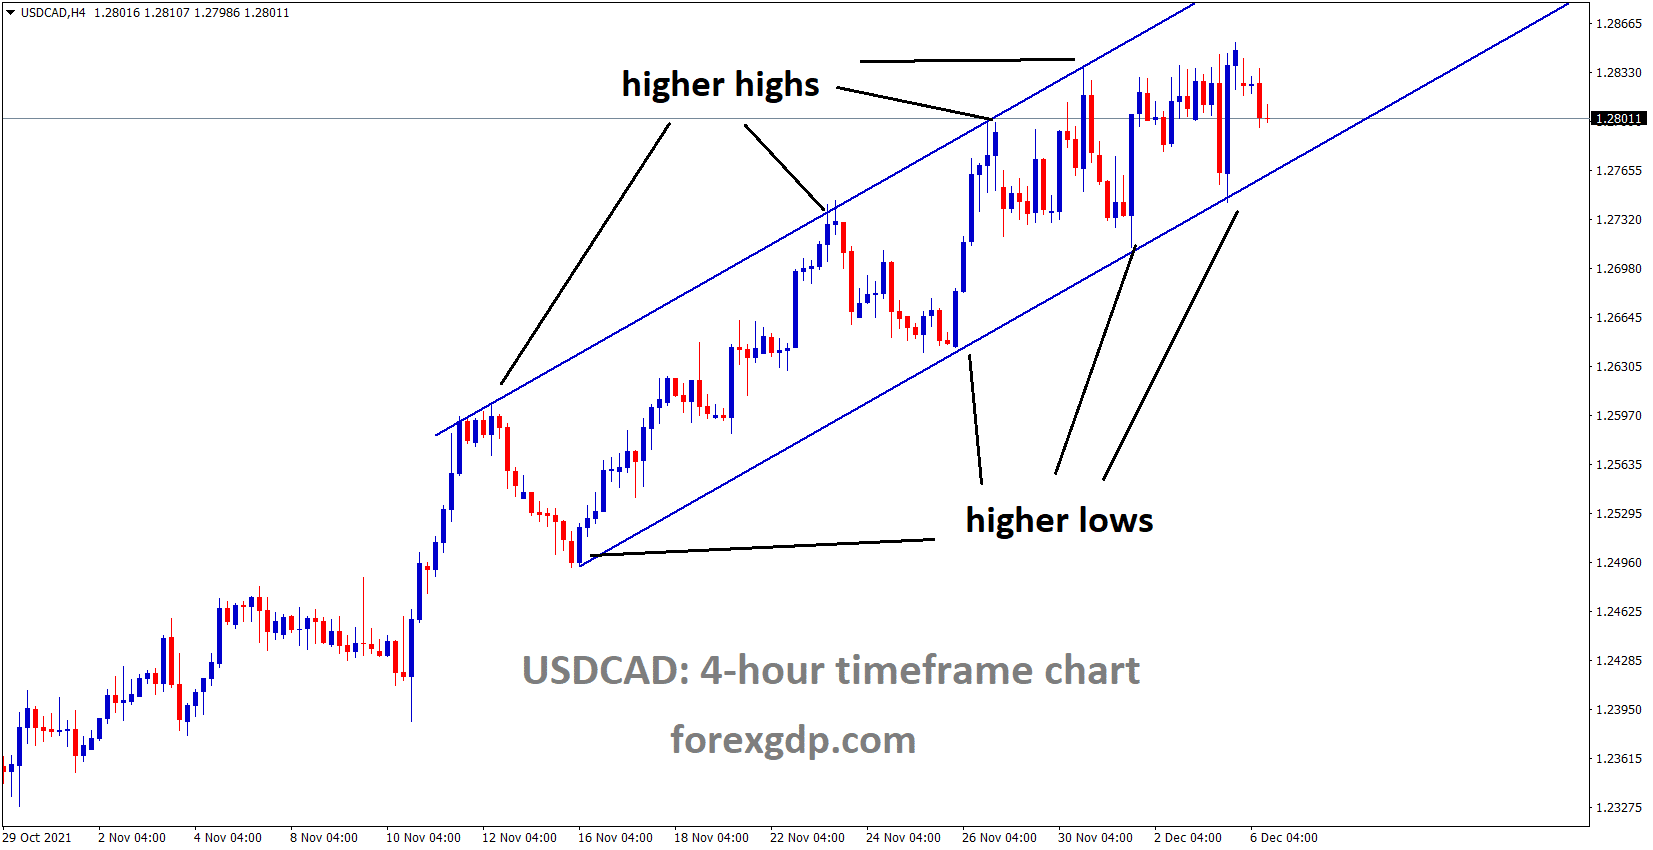 USDCAD is moving in an Ascending channel and the market fell from the higher high area of the channel